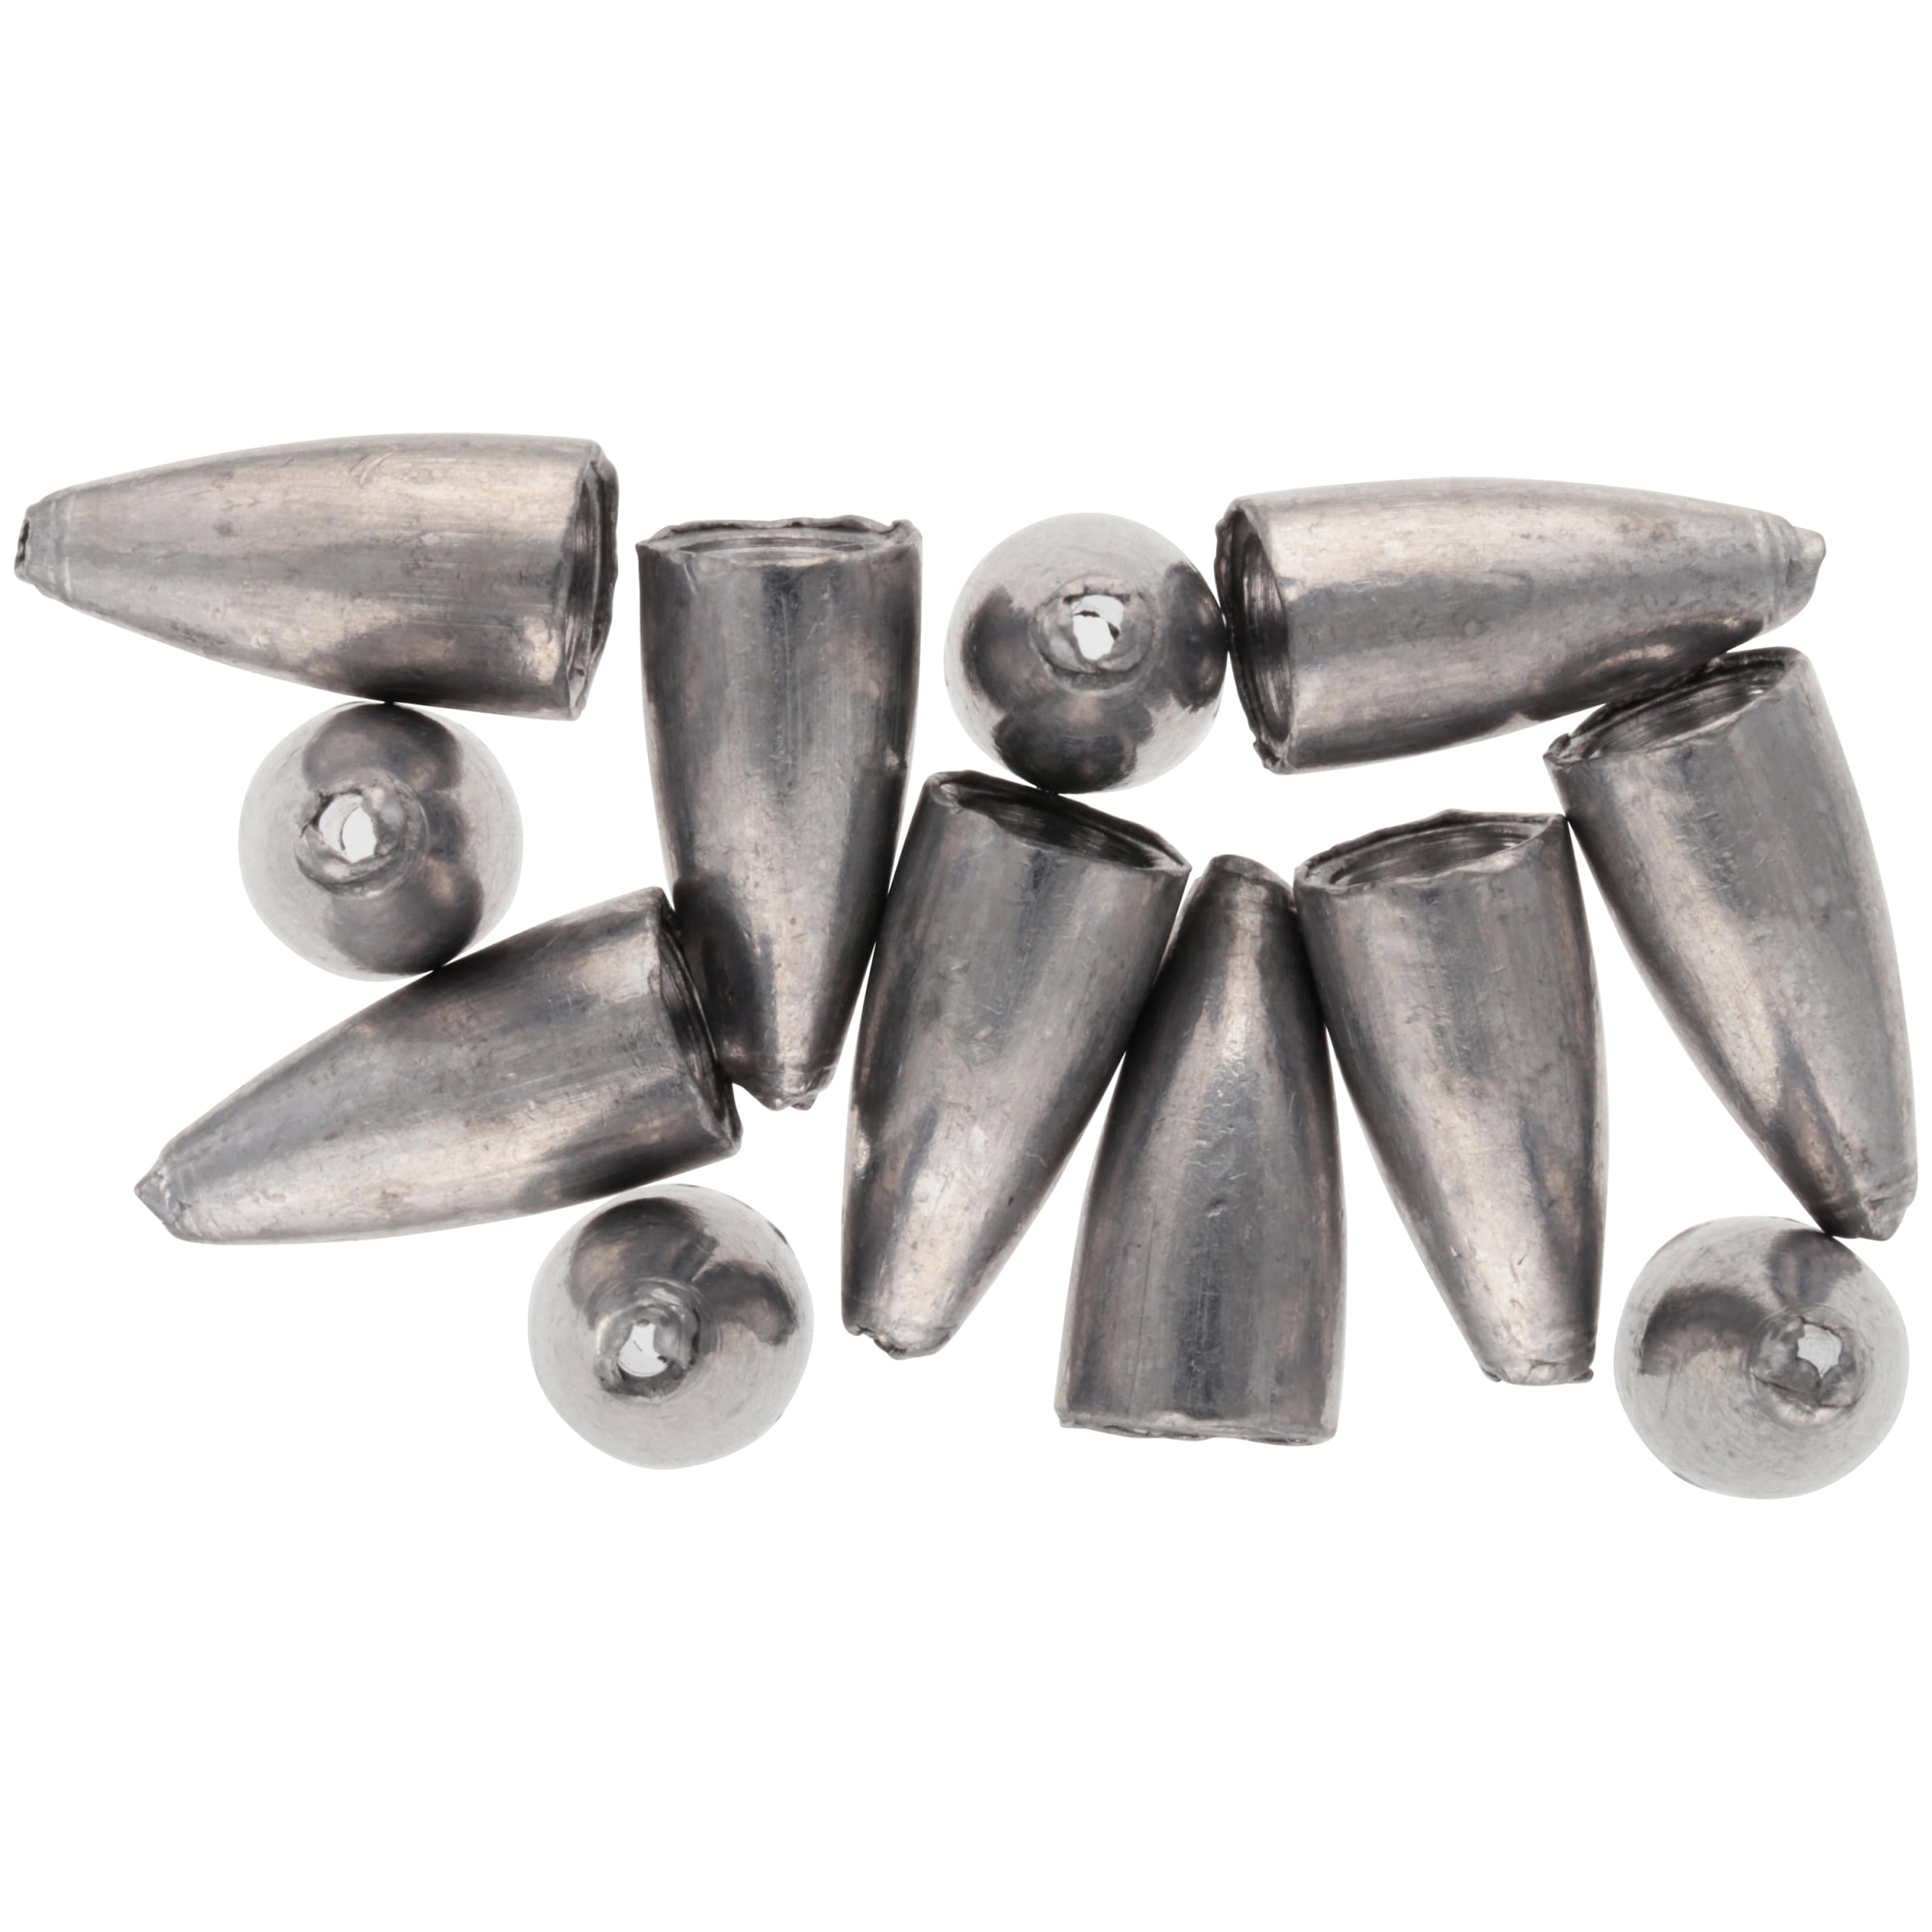 Bullet Weights Sinker Fishing Weights Sinkers Worm Weights for Bass Fishing 